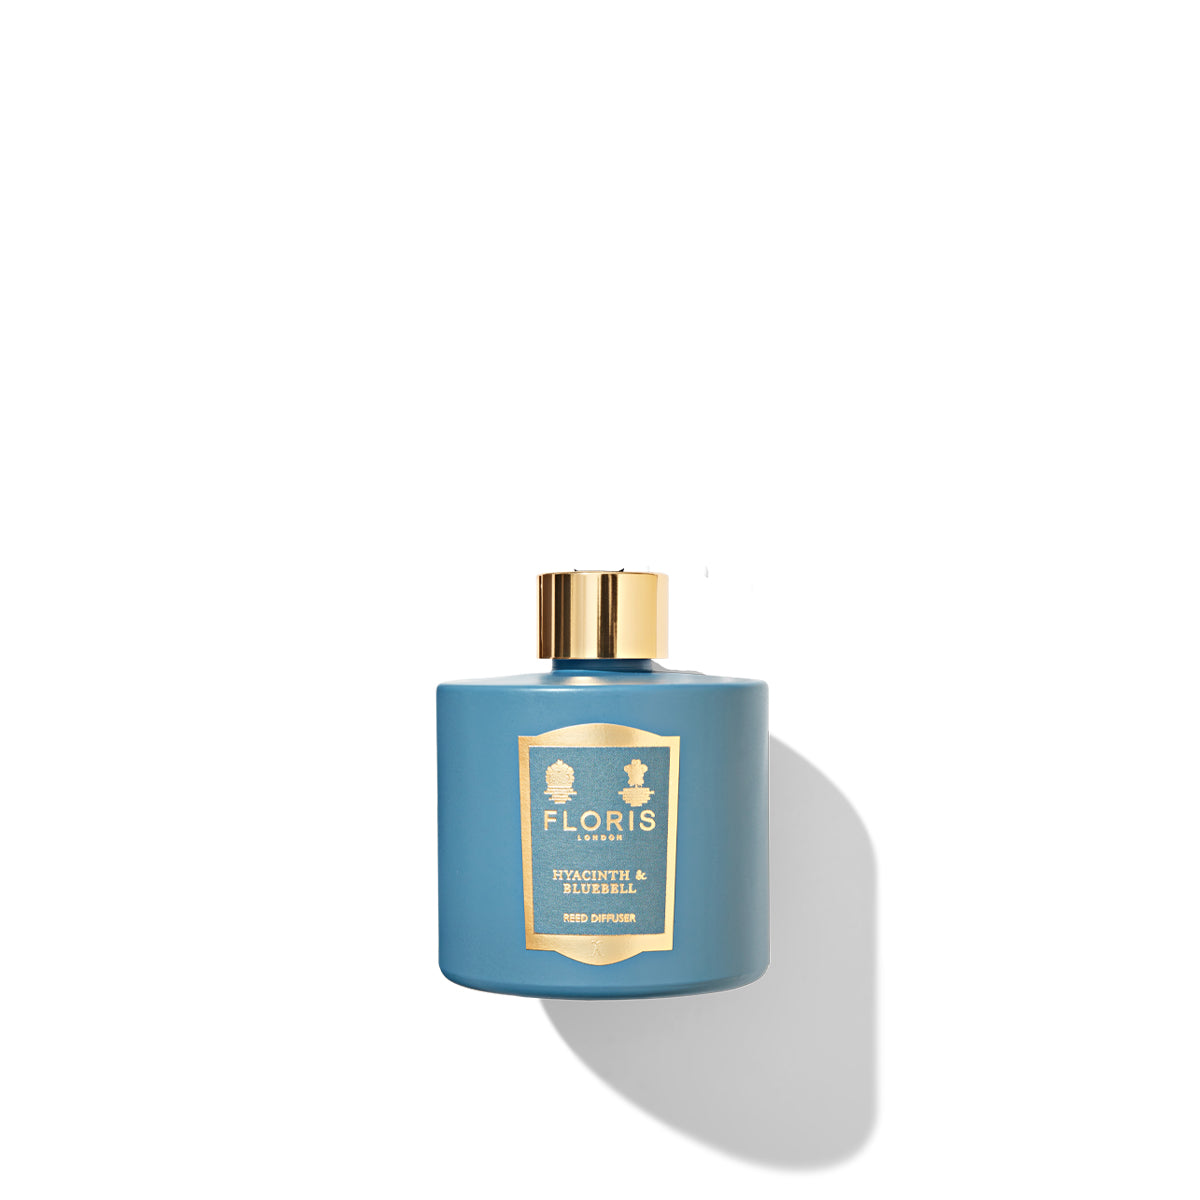 A Hyacinth & Bluebell - Reed Diffuser by Floris London, featuring a blue bottle with a gold cap and label, casts a soft shadow on a white background while filling the space with a delicate floral fragrance reminiscent of spring flowers.